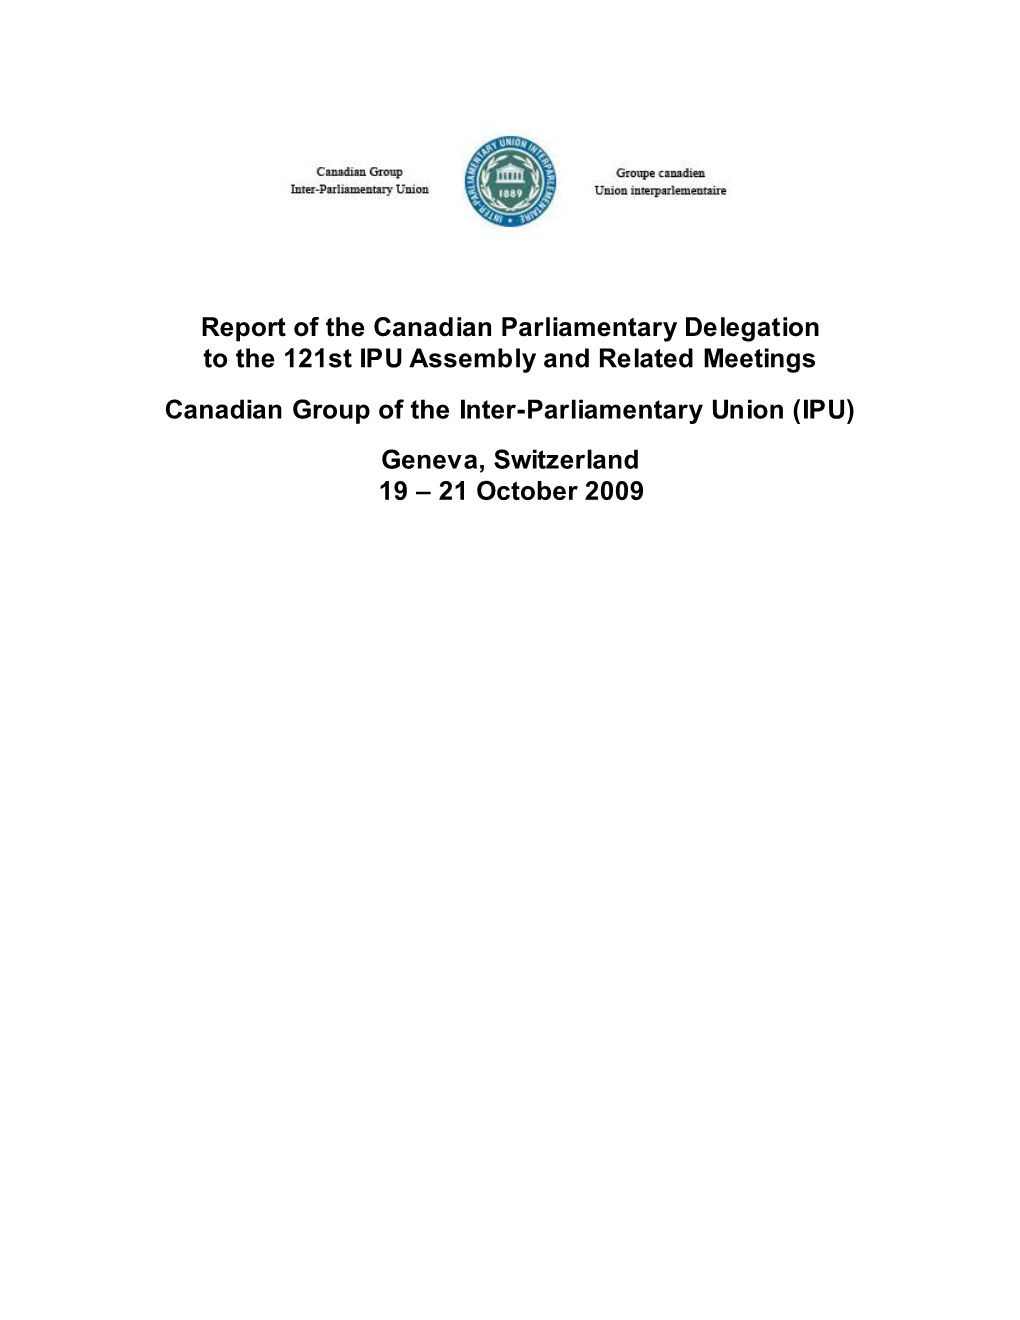 Report of the Canadian Parliamentary Delegation to the 121St IPU